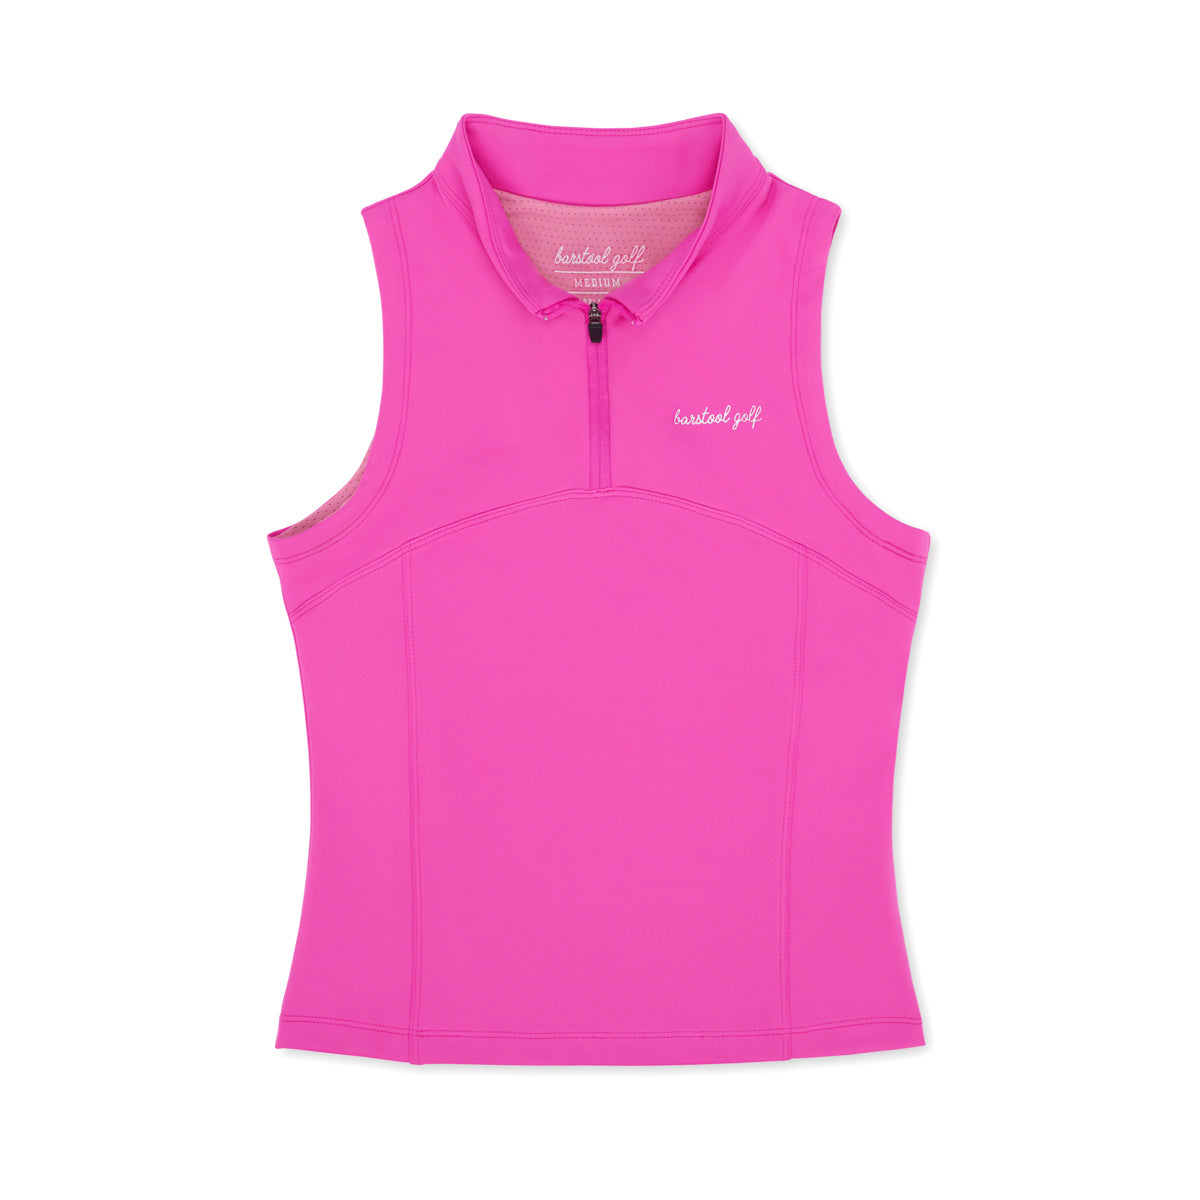 Barstool Golf Women's Sleeveless Solid Top II-T-Shirts-Fore Play-Pink-XS-Barstool Sports